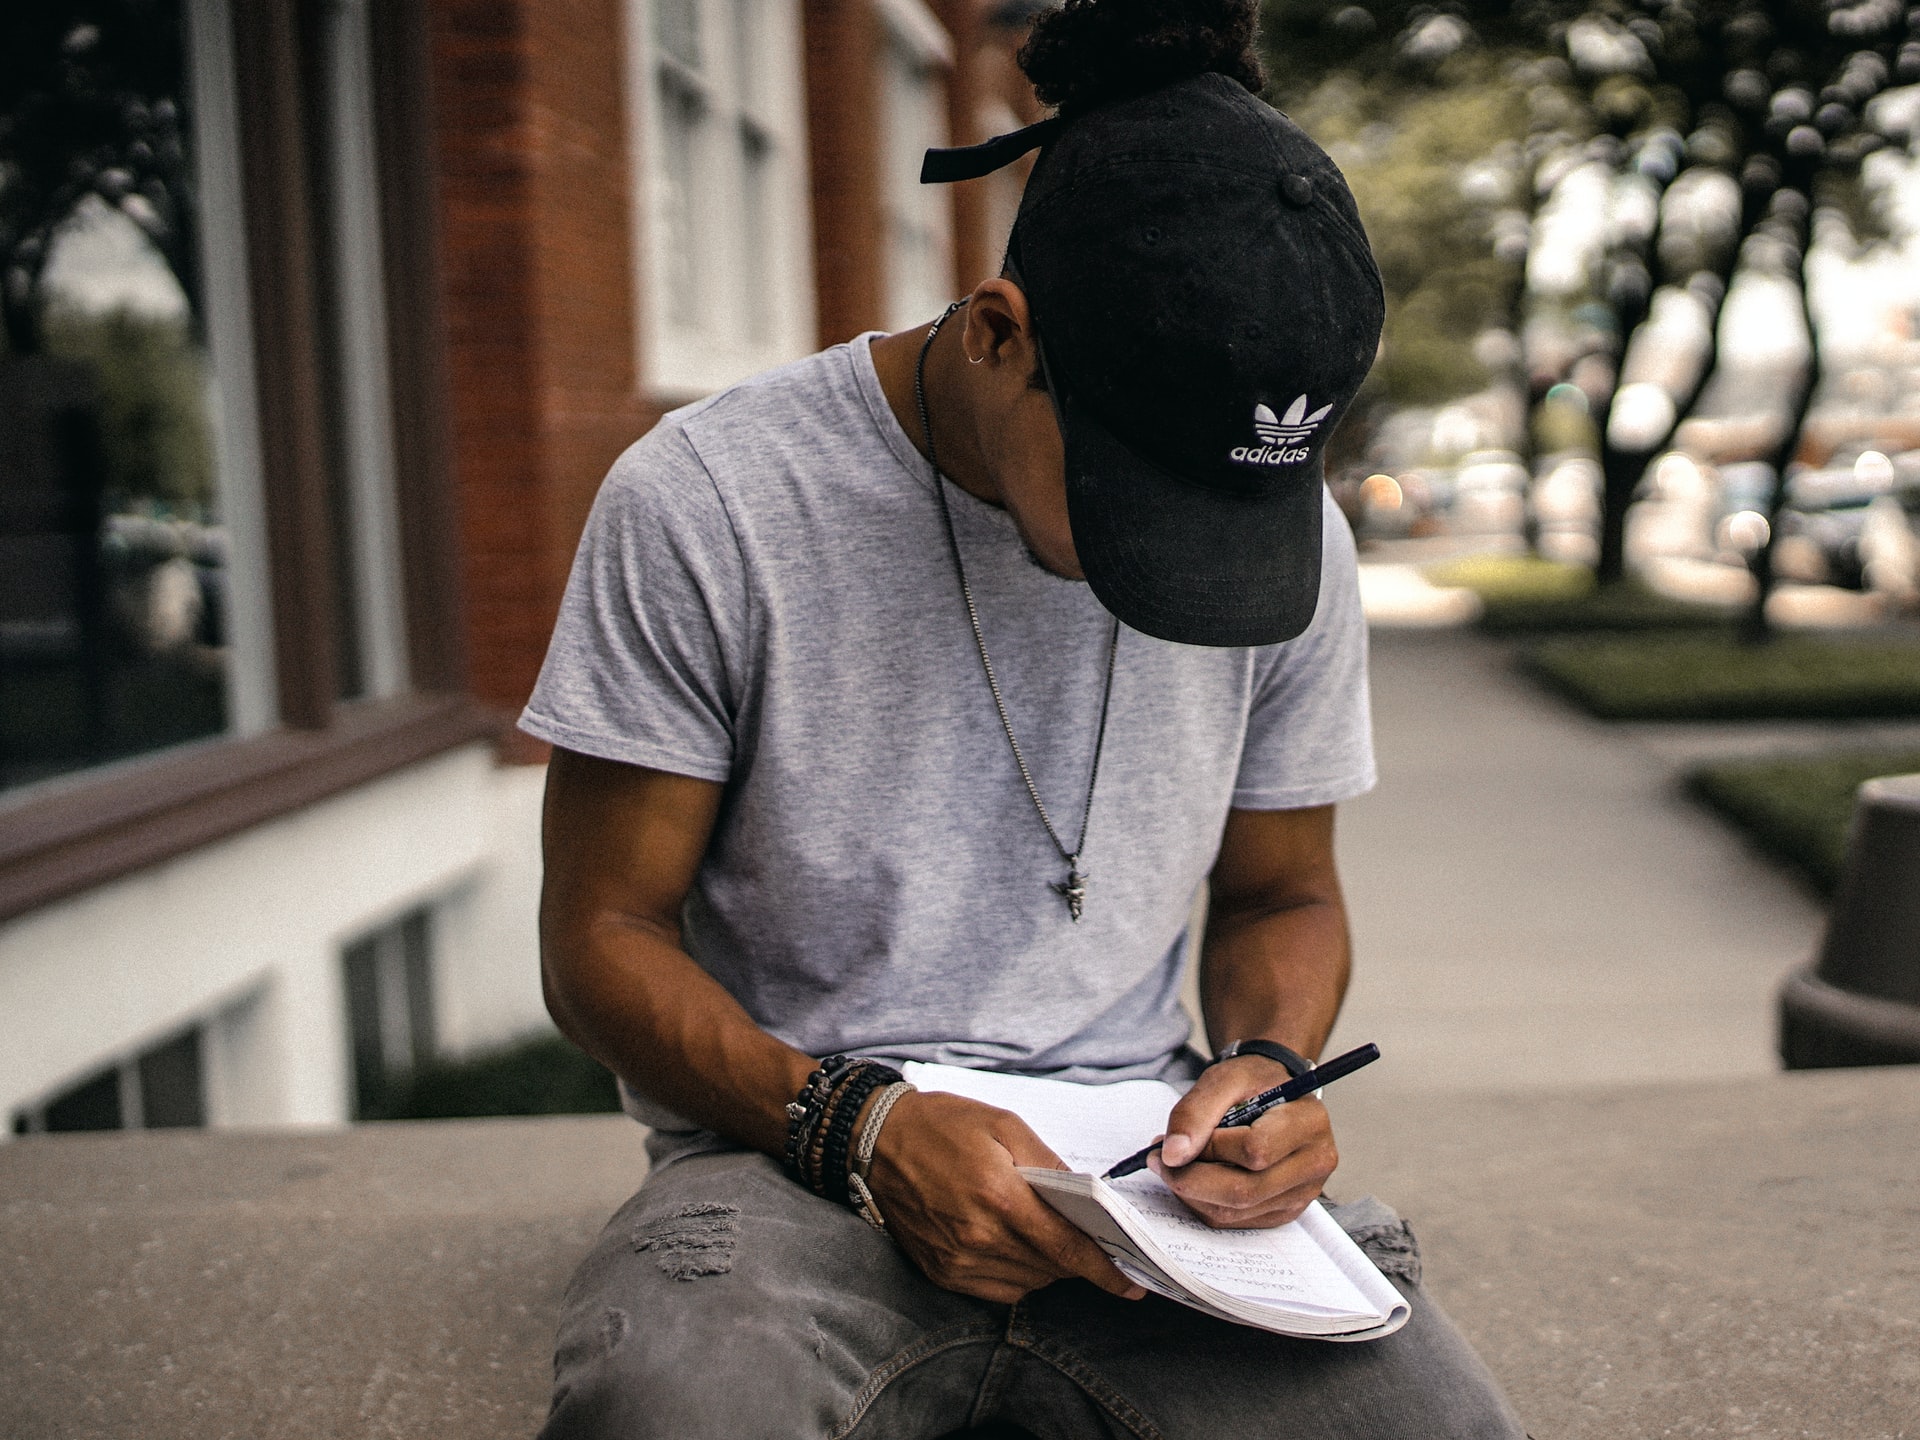 Student wearing a baseball cap sitting outside writing in a notebook.